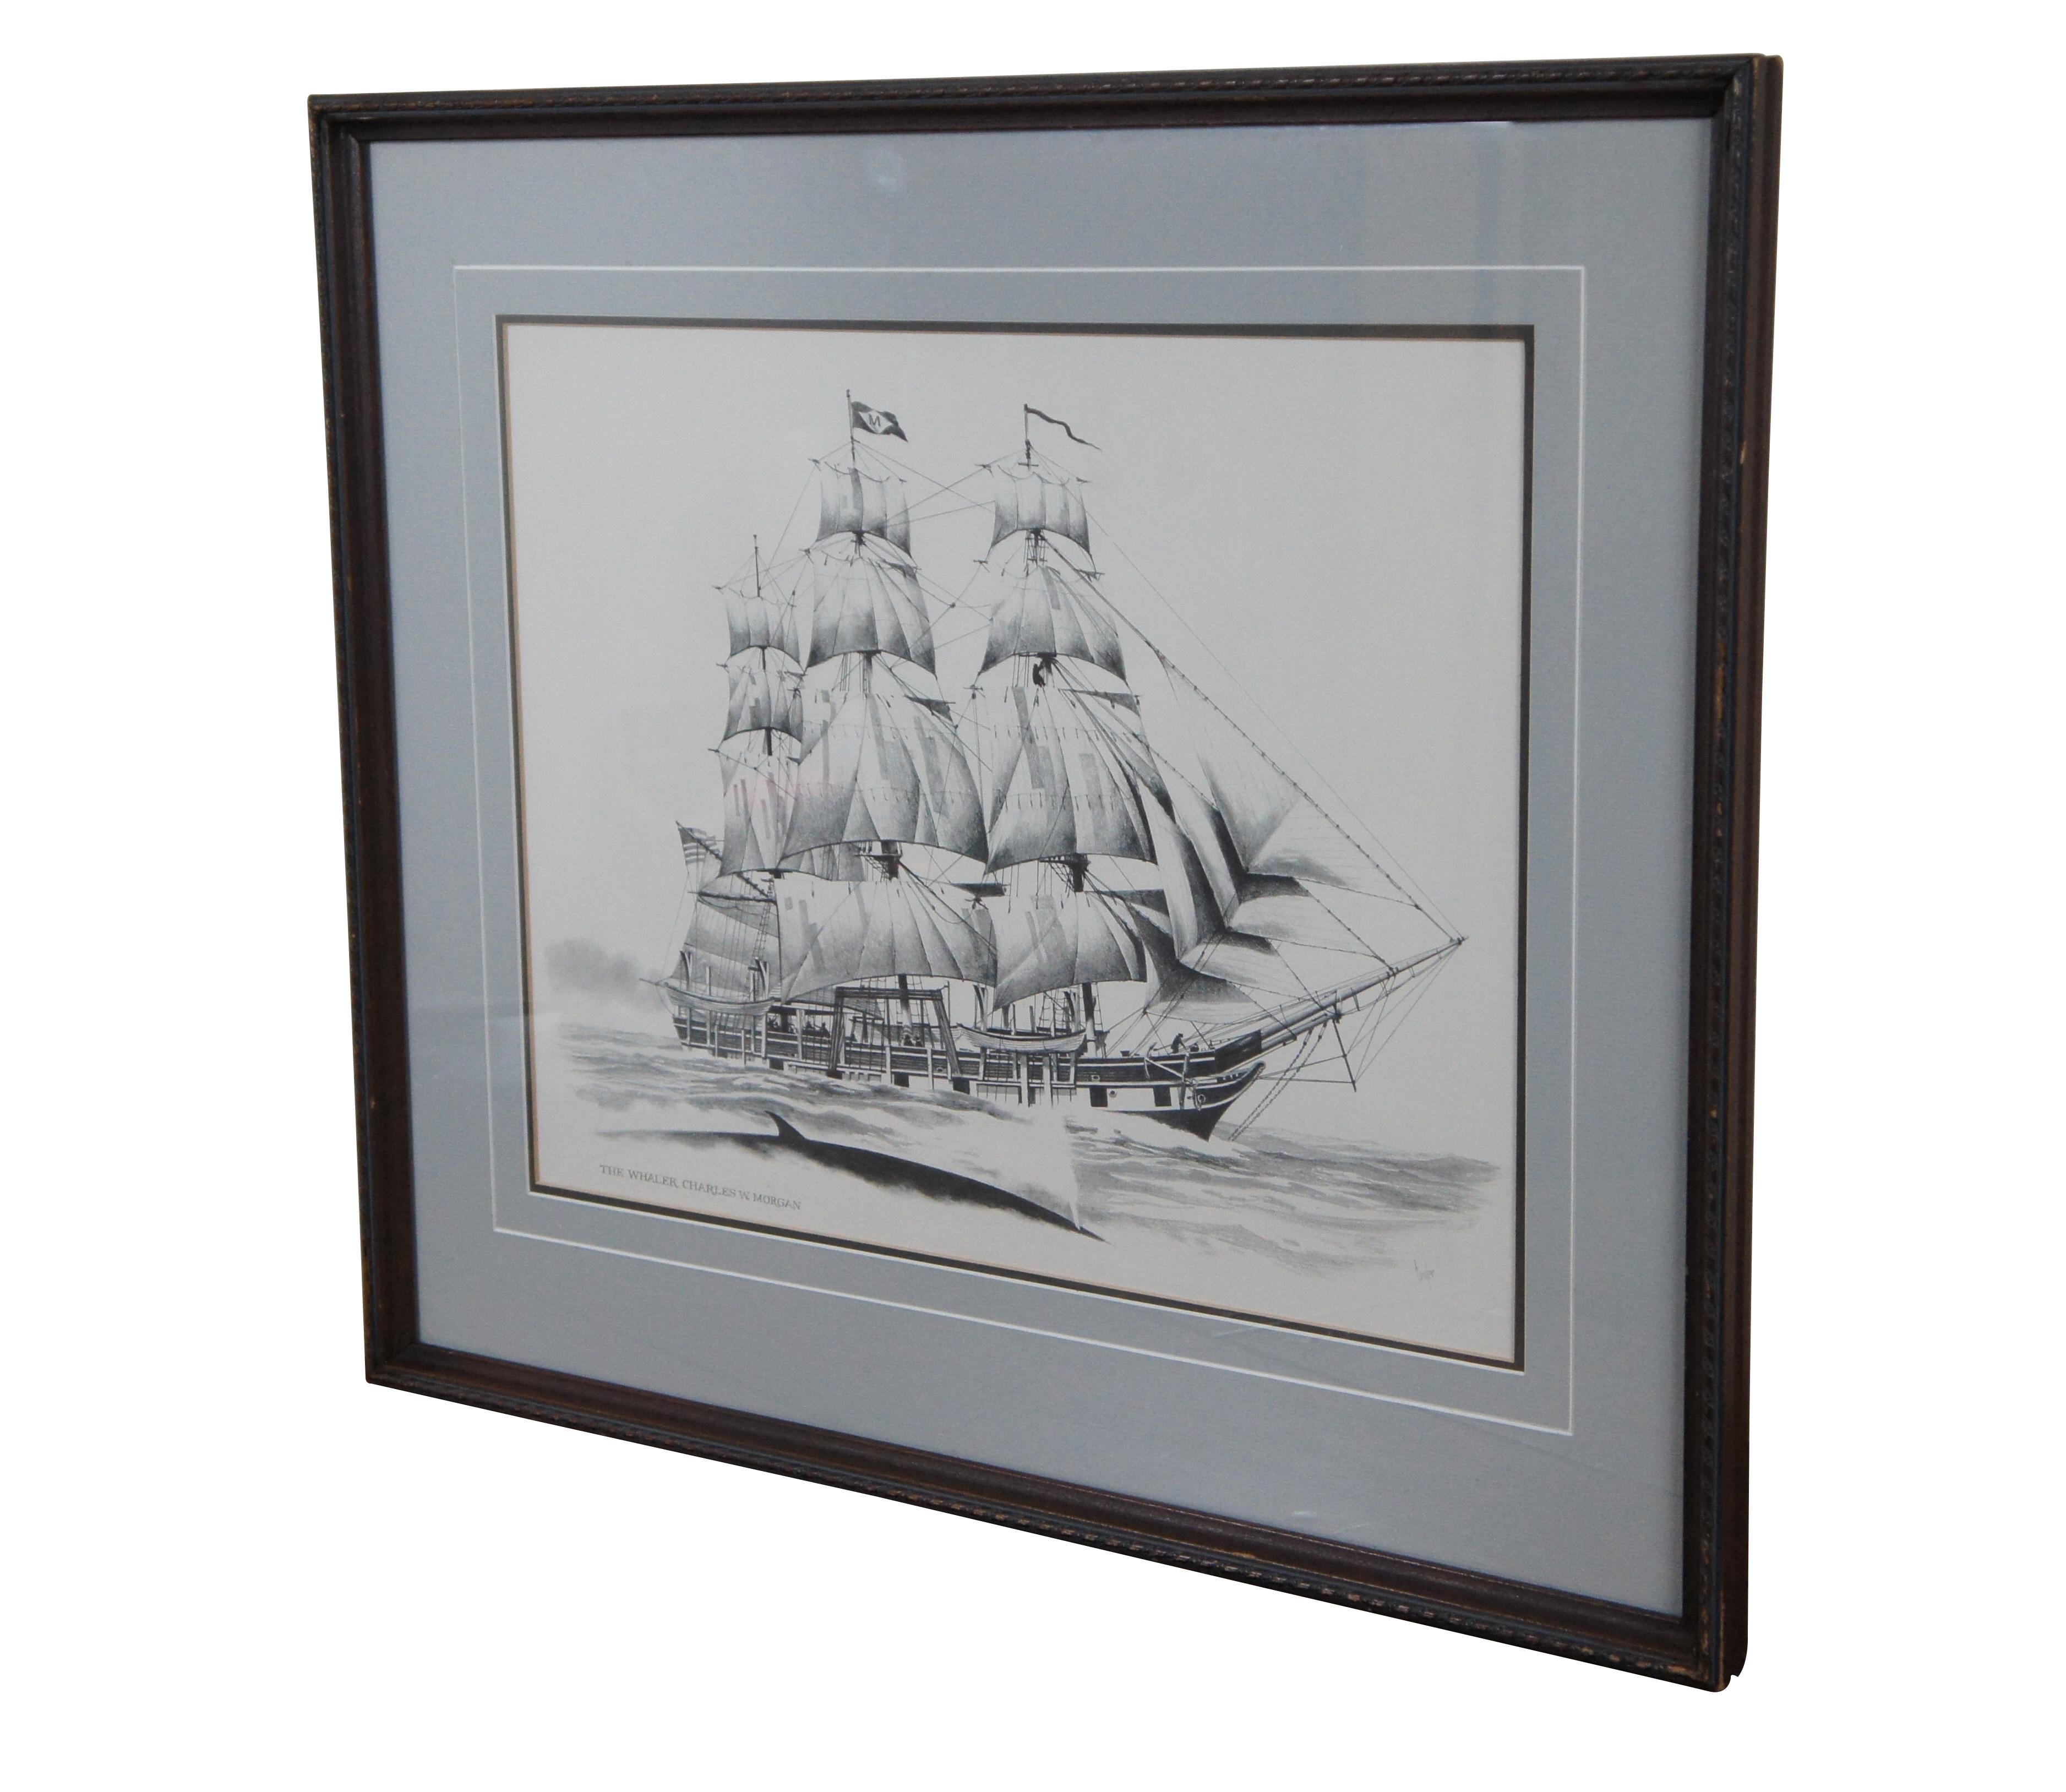 Late 20th century black and white lithograph print depicting “The Whaler Charles W. Morgan” from an engraving by Fowler. Displayed in a neatly carved dark wood frame. Professionally matted and framed under glass.

Charles W. Morgan is an American